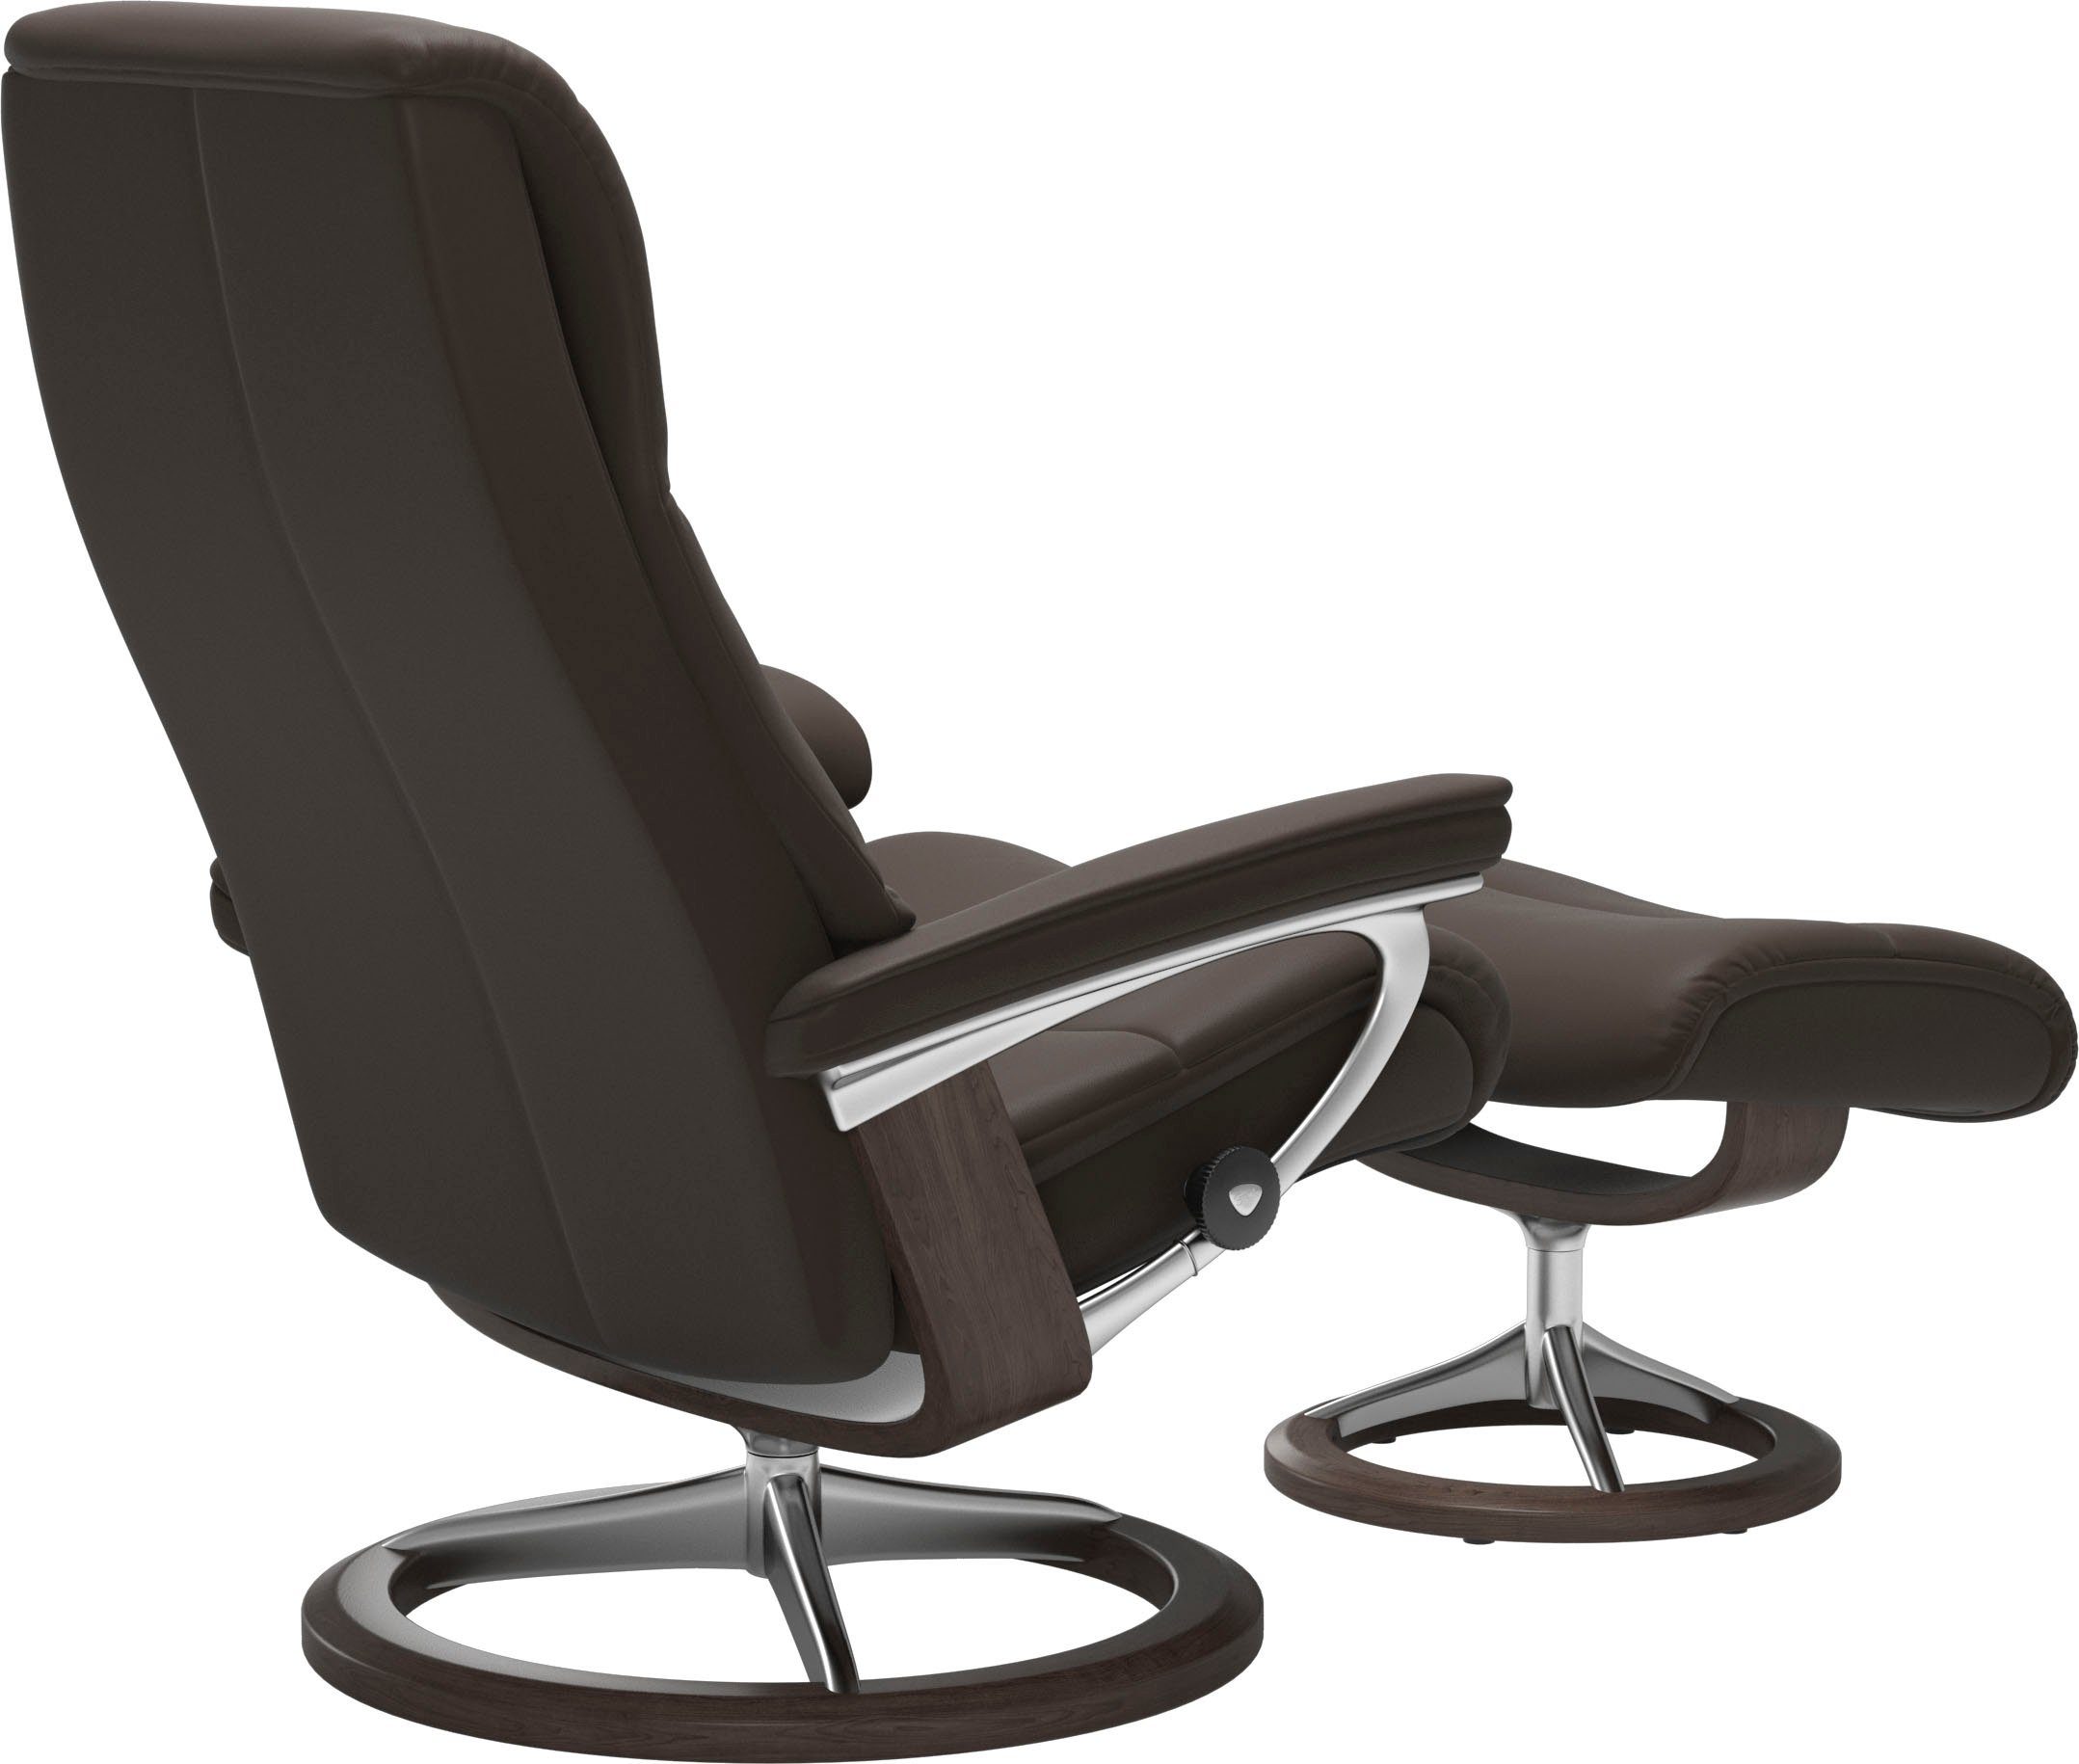 Wenge Base, Signature Relaxsessel Stressless® View, Größe S,Gestell mit